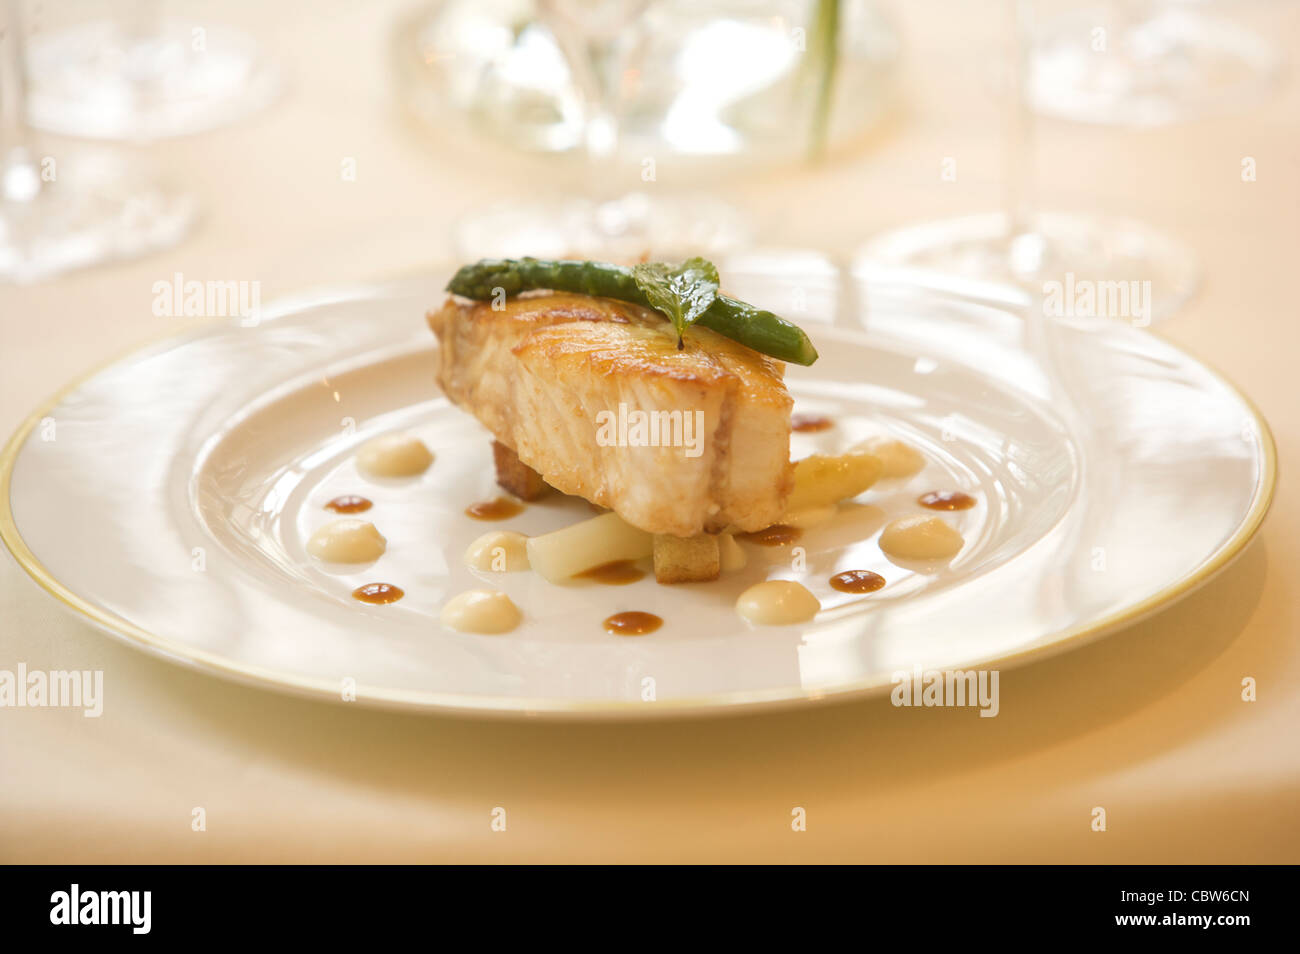 Plated food from Restaurant Patrick Guilbaud, the only two Michelin Star restaurant in the Merrion Hotel Dublin, Ireland. Stock Photo